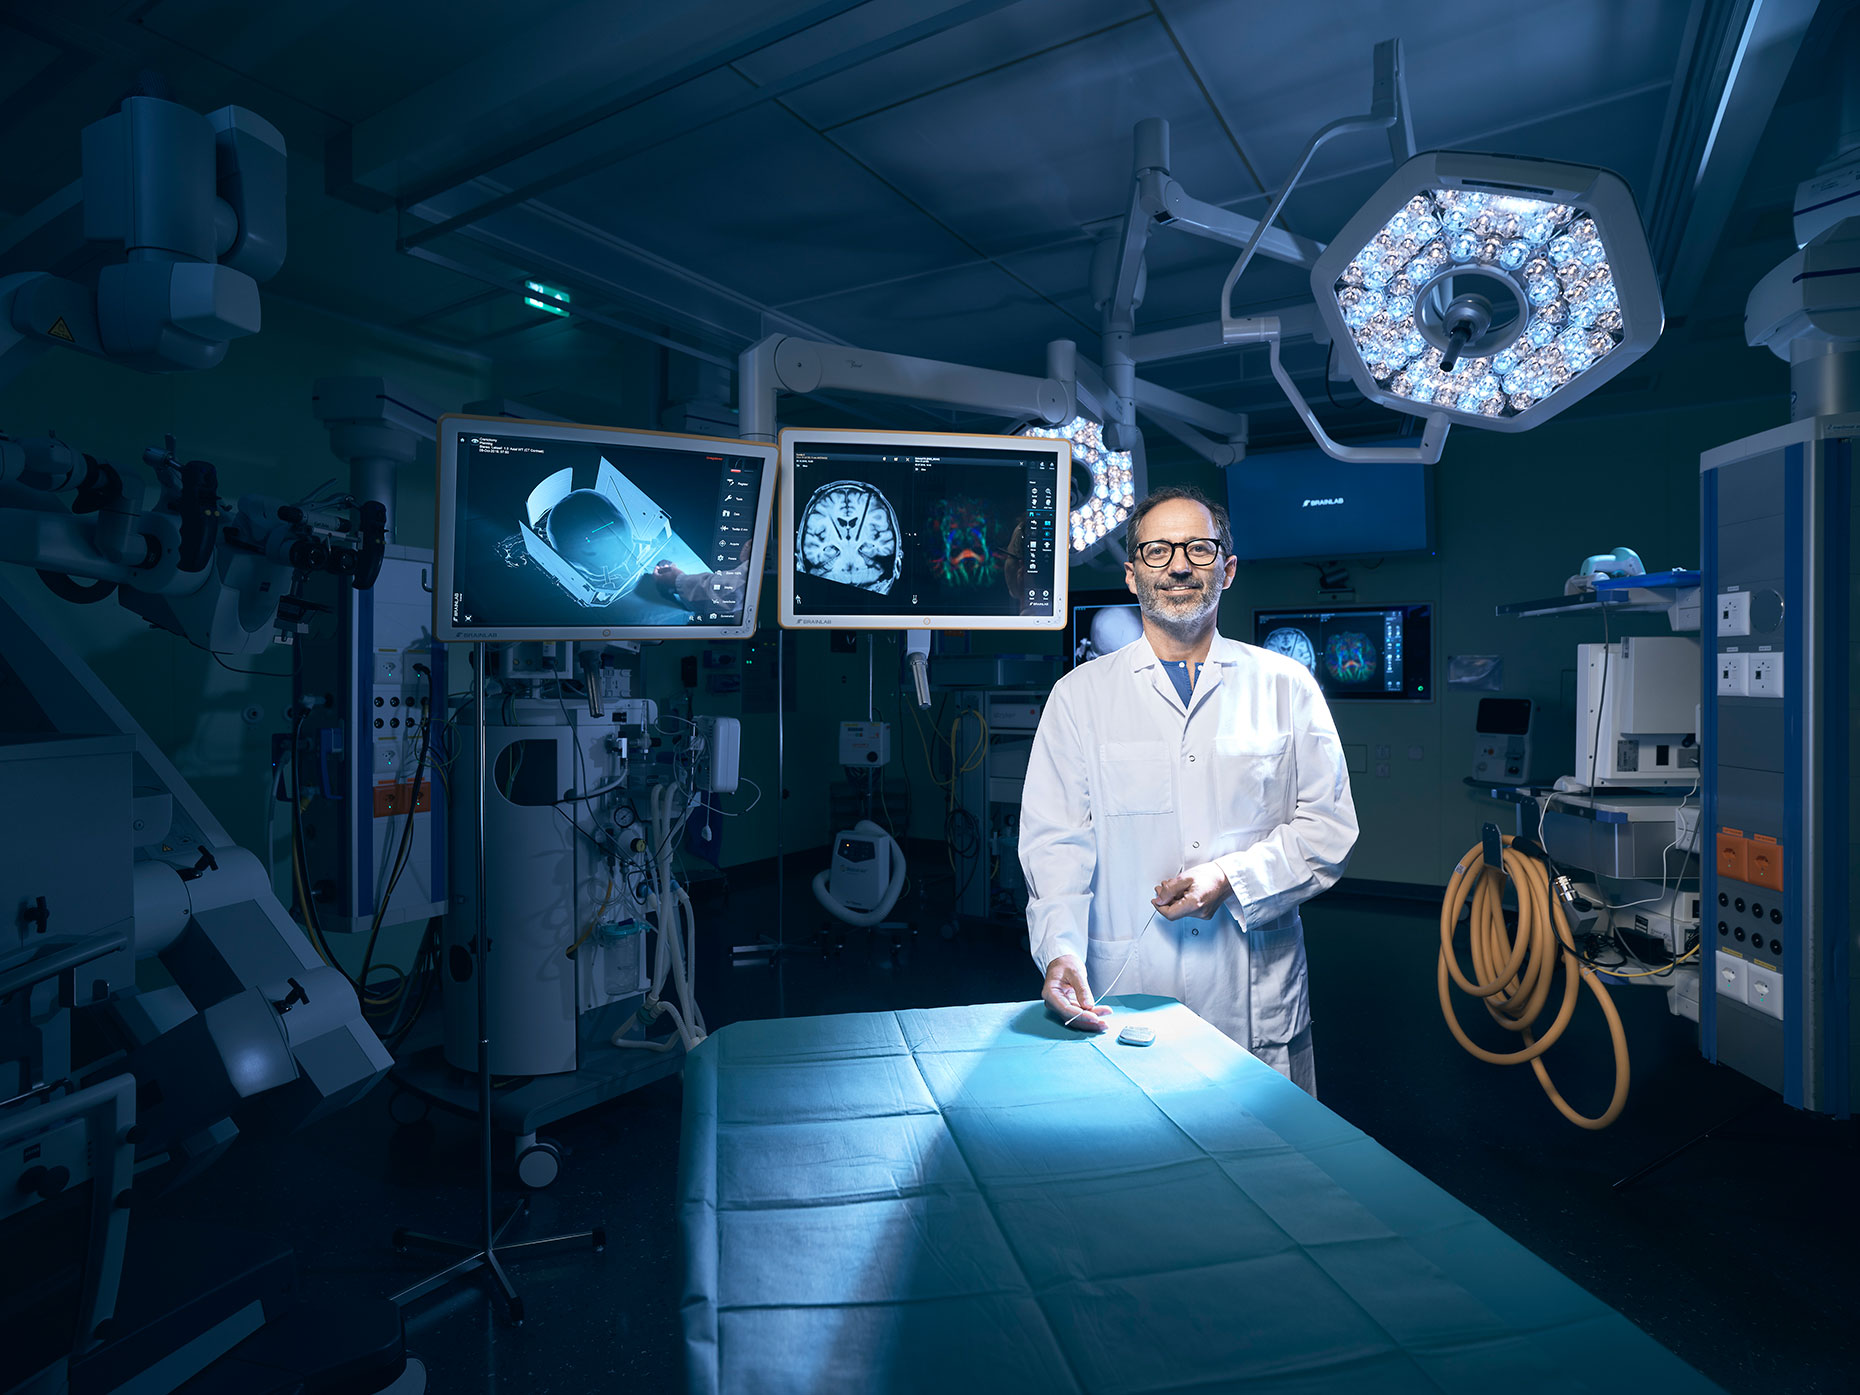 Claudio Pollo, Deputy Head Physician, Head of Functional Neurosurgery in an operating room at Inselspital Bern for Bilanz